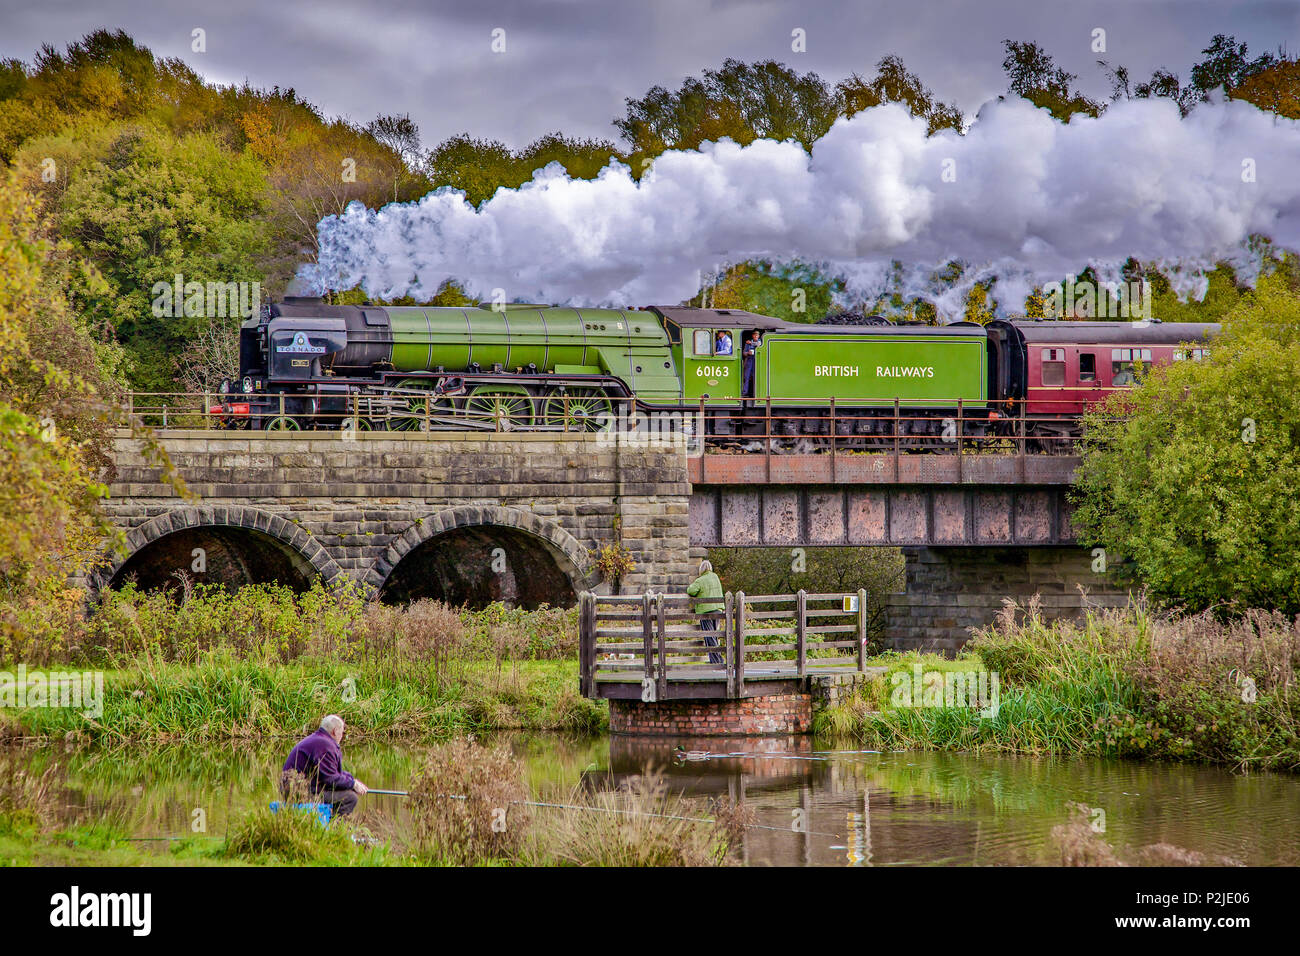 The new Peppercorn A1 Pacific locomotive No. 60163 Tornado on the East Lancashire Railway.The engine is seen passing through the Burrs Country Park on Stock Photo